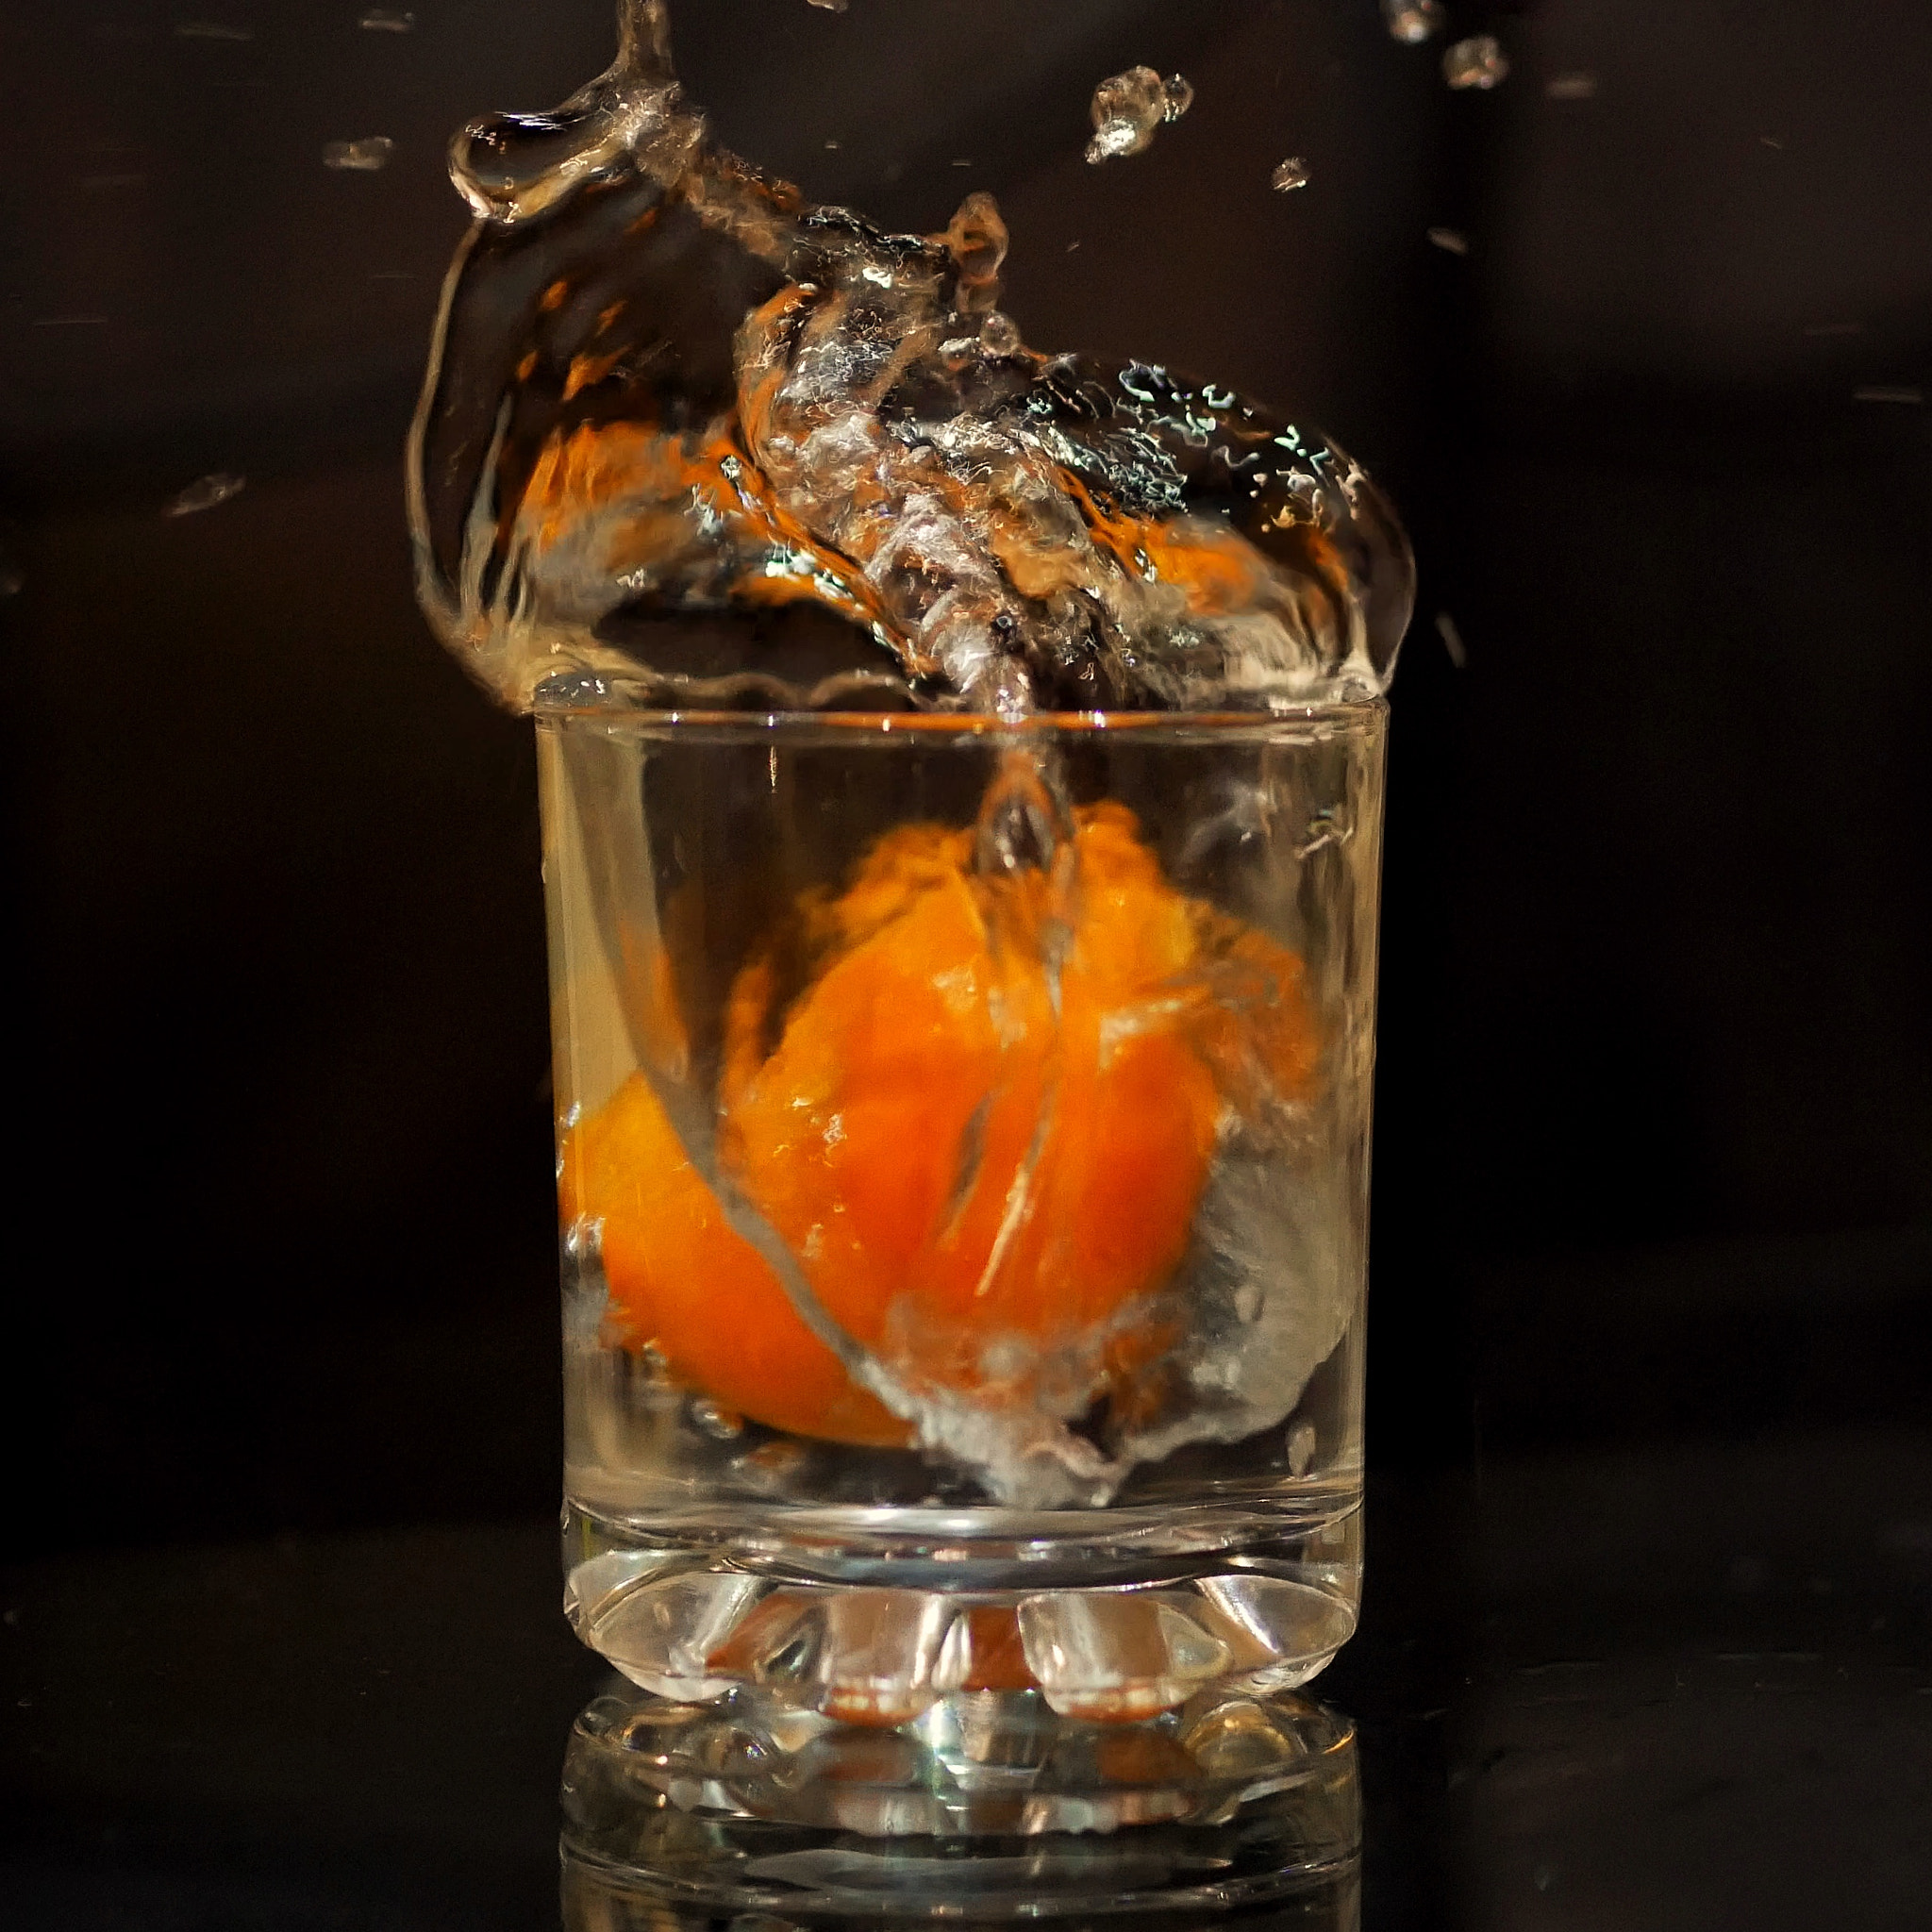 Panasonic Lumix DMC-GX85 (Lumix DMC-GX80 / Lumix DMC-GX7 Mark II) sample photo. Orange dropping in a glass of water/cocktail photography